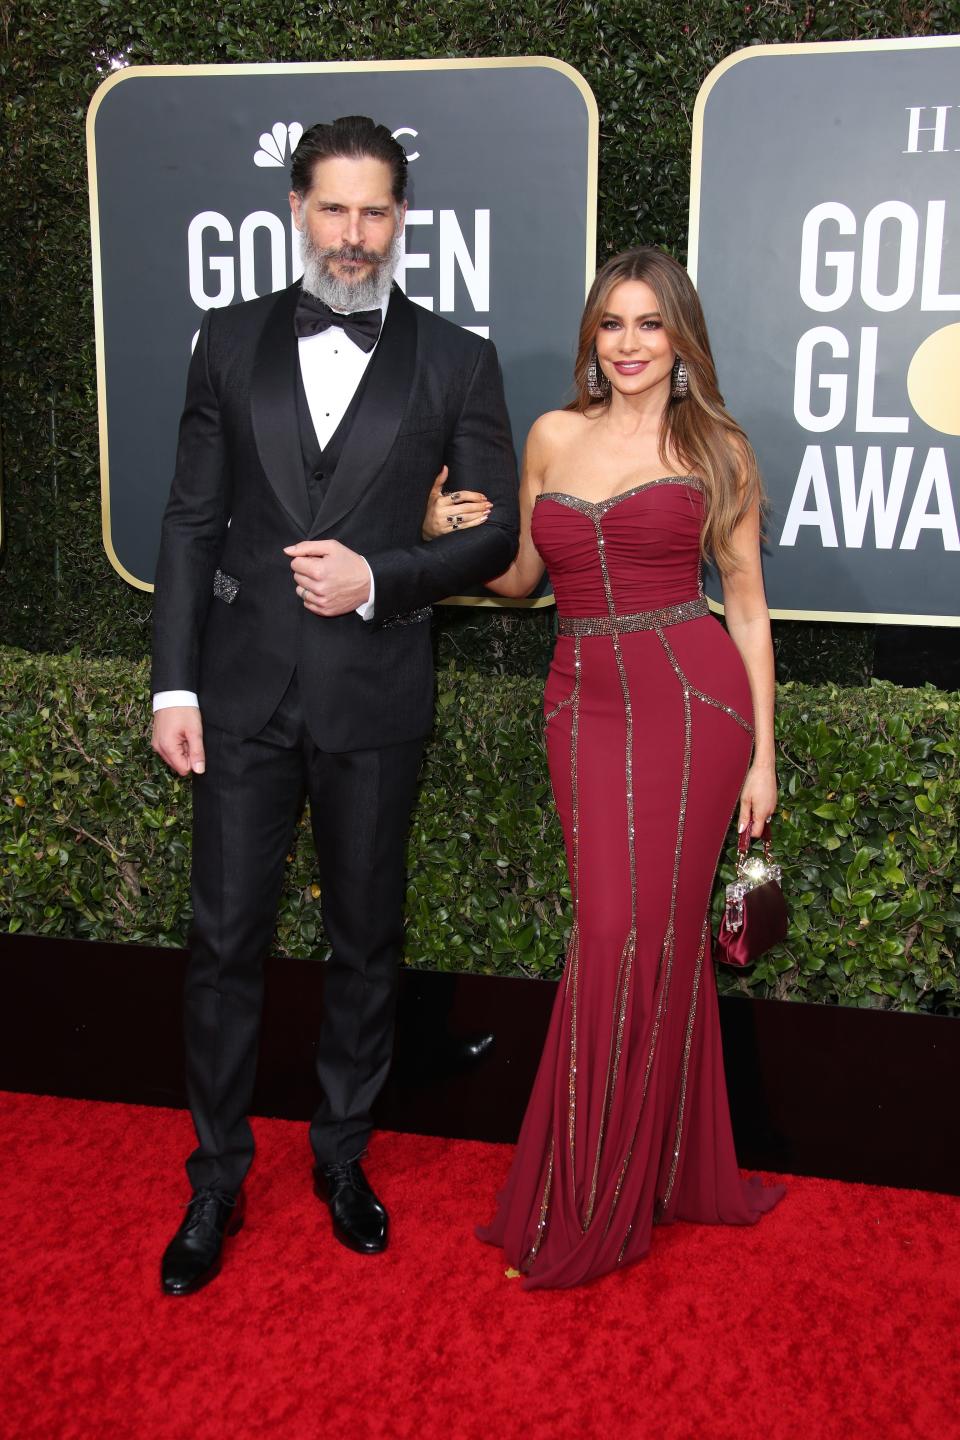 Sofía Vergara and Joe Manganiello, pictured here in January 2020, were married for seven years before Manganiello filed for divorce in July.